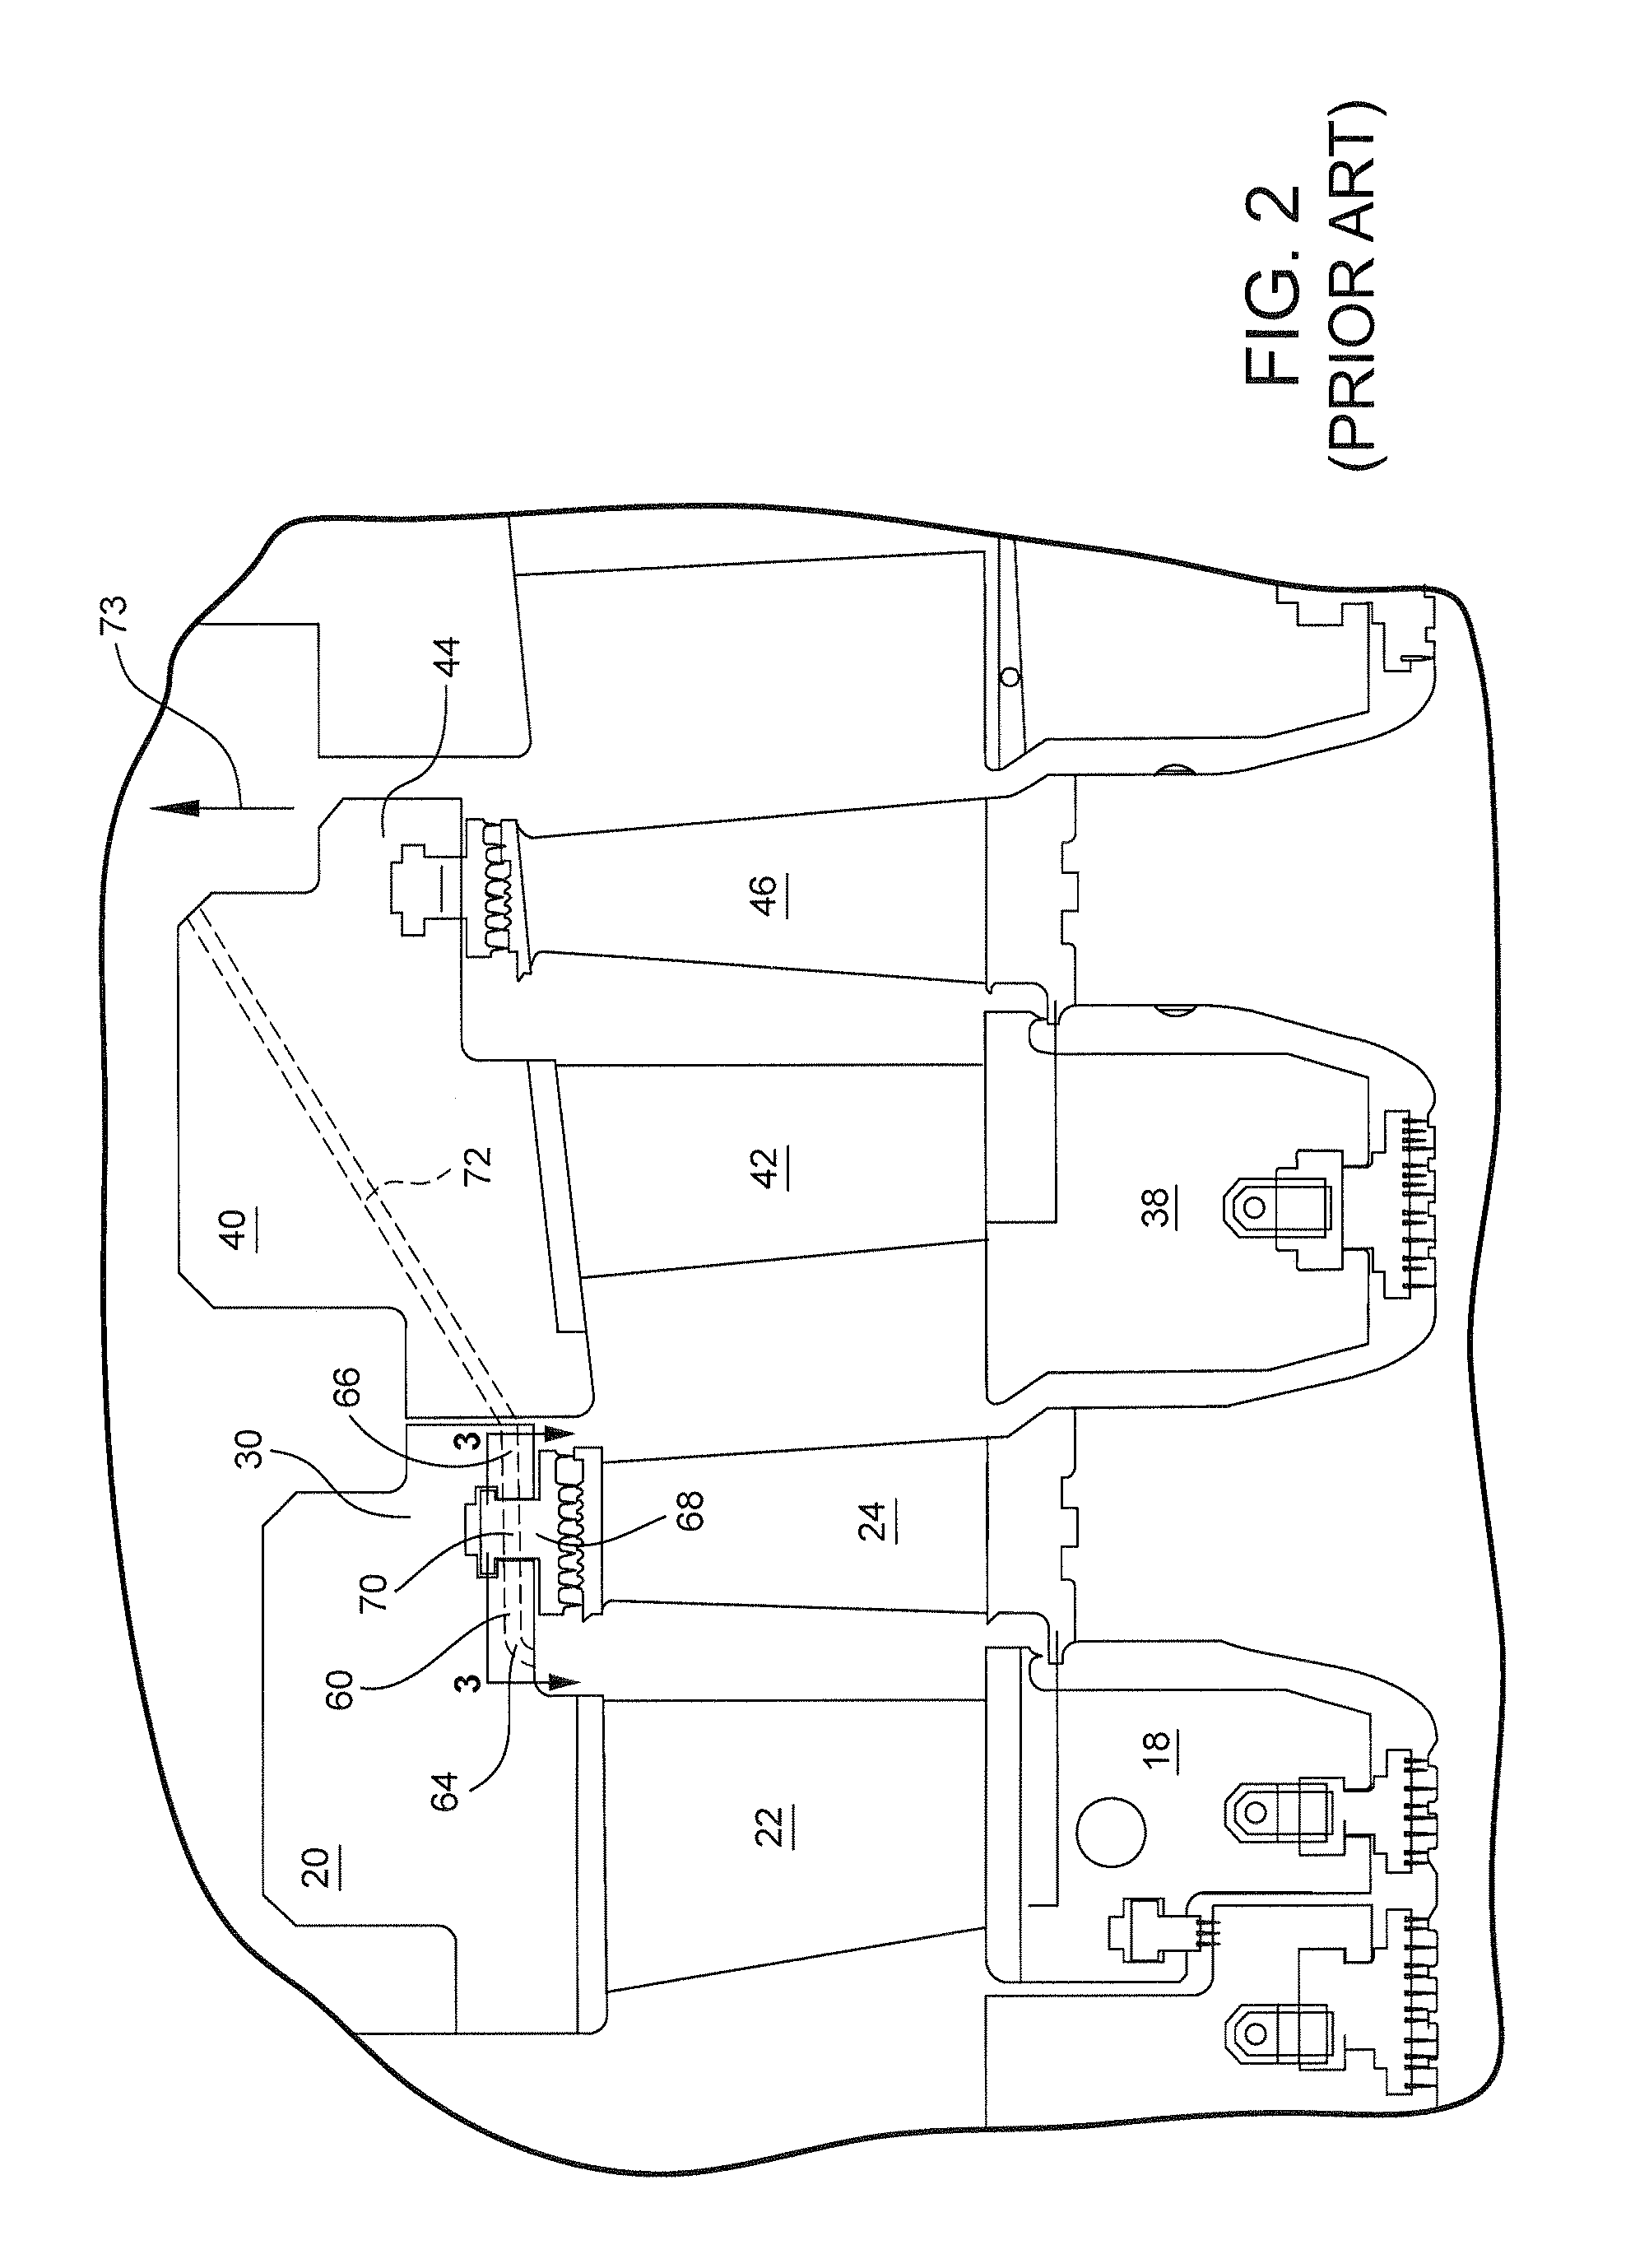 Apparatus for minimizing solid particle erosion in steam turbines